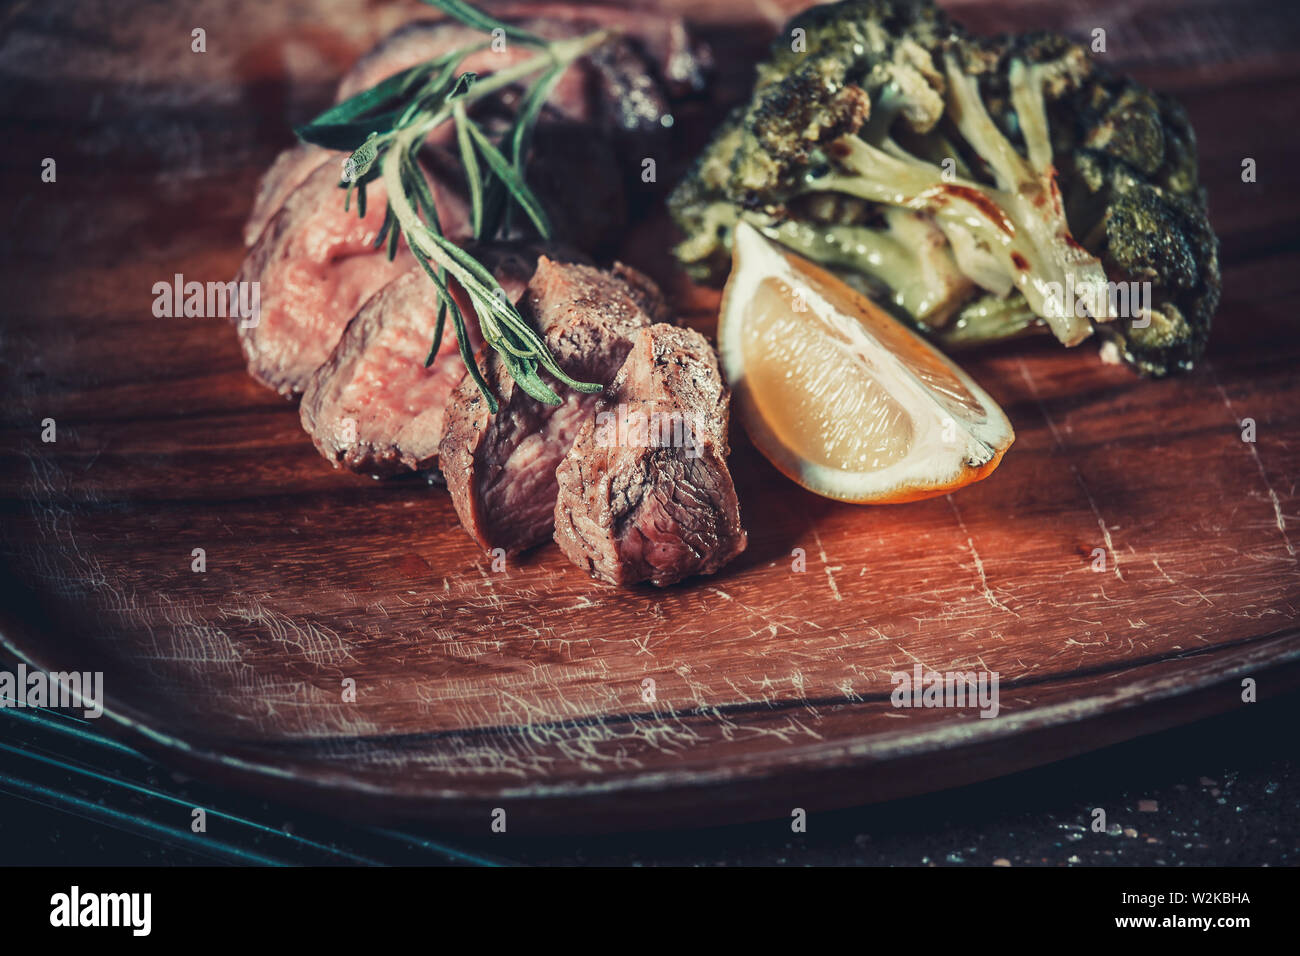 Delicious appetizer with herbs on wooden table close up Stock Photo